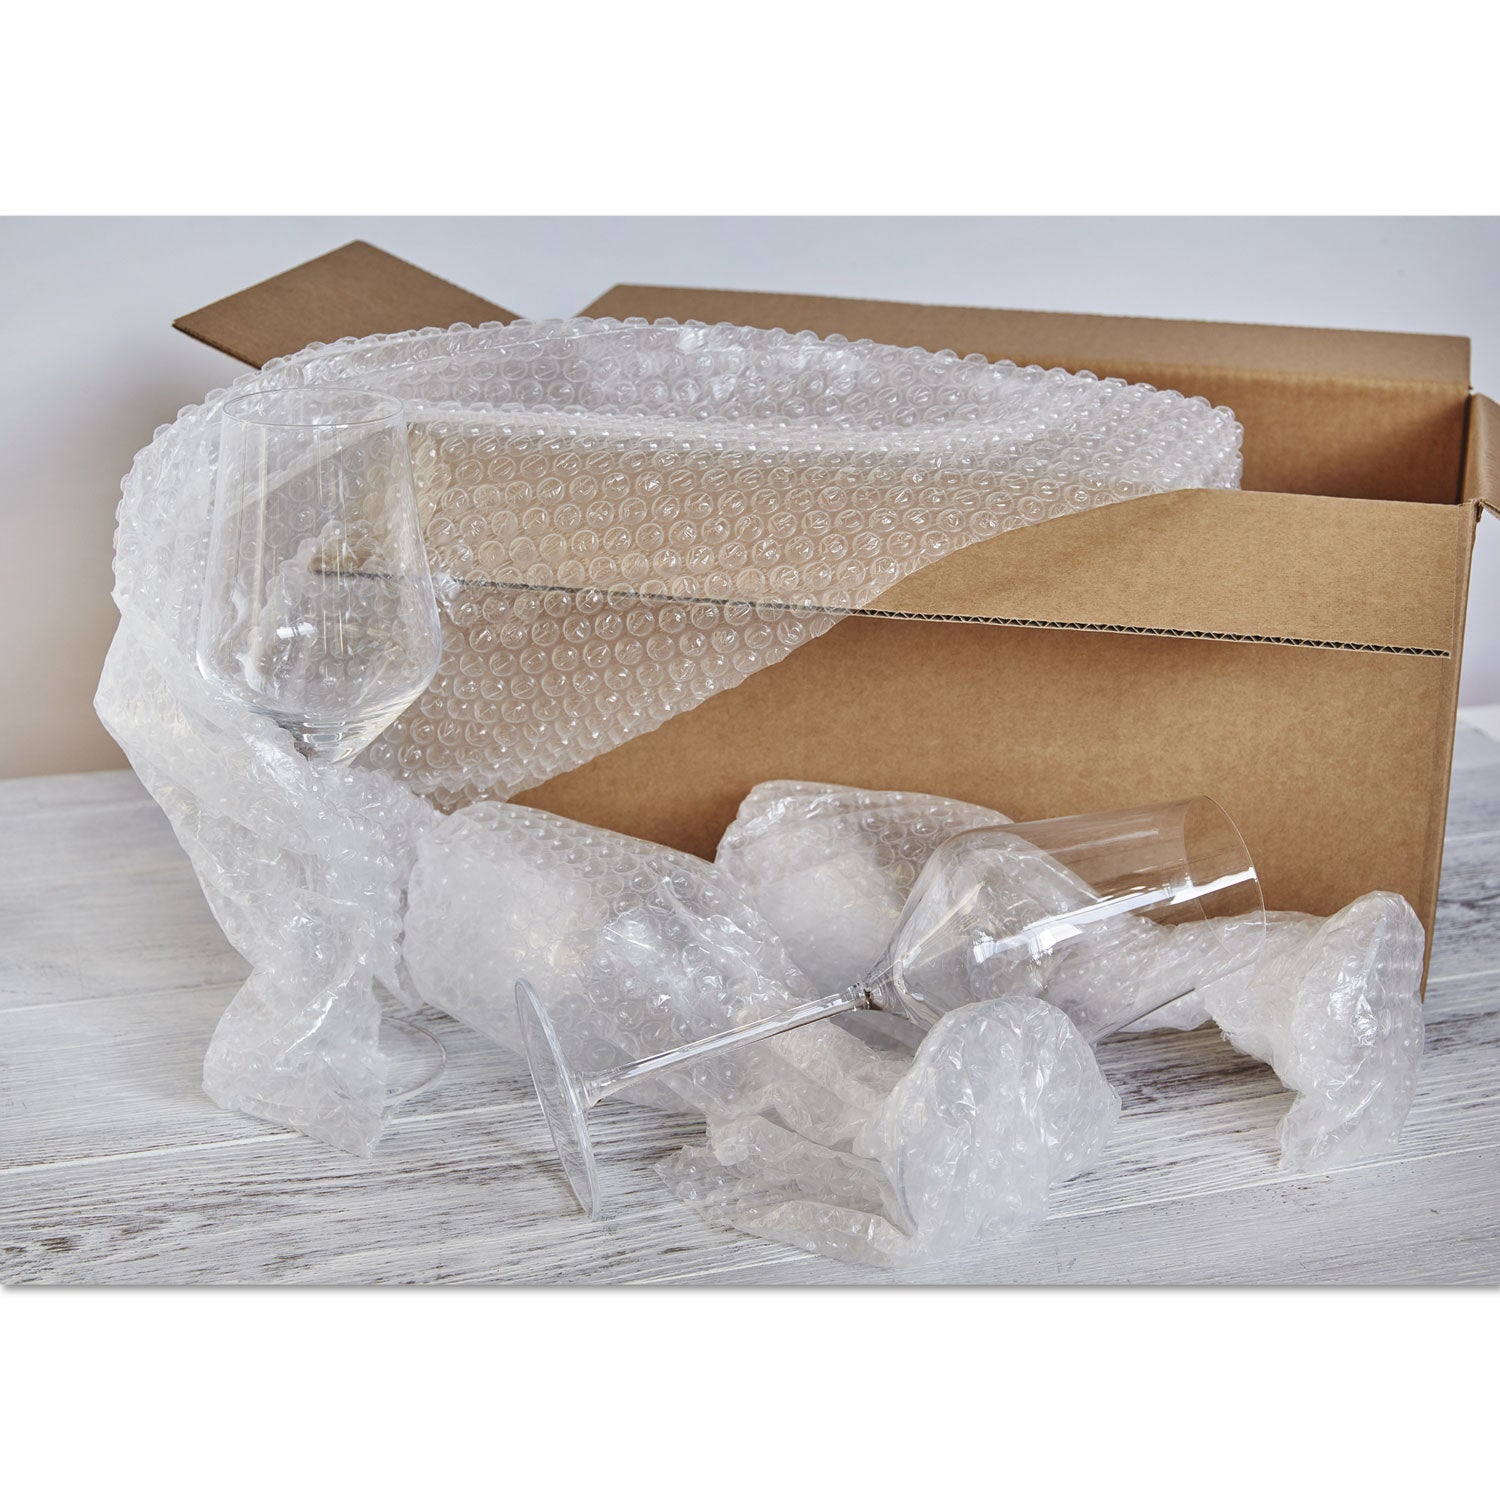 Recycled Bubble Wrap, Light Weight 0.31" Air Cushioning, 12" x 100 ft - 